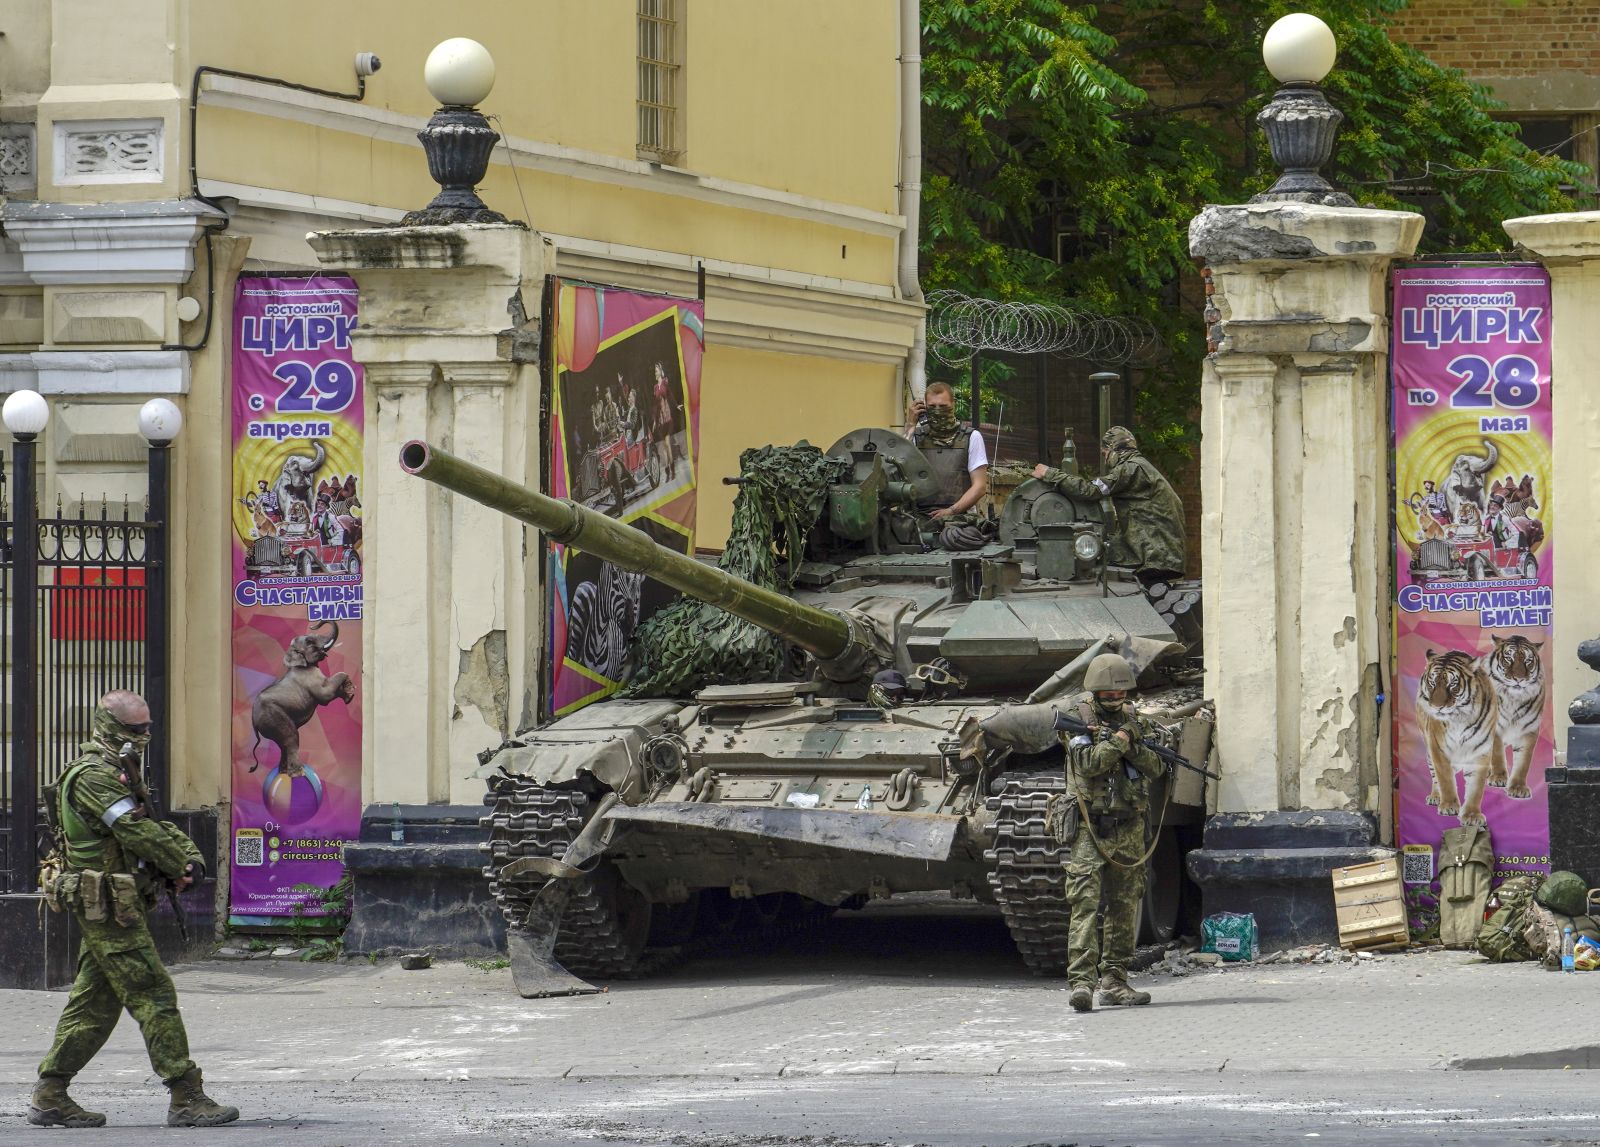 epa10709318 Armed private military company (PMC) Wagner Group servicemen, including some on a tank, keep watch at street in downtown Rostov-on-Don, southern Russia, 24 June 2023. Security and armoured vehicles were deployed after Wagner Group's chief Yevgeny Prigozhin said in a video that his troops had occupied the building of the headquarters of the Southern Military District, demanding a meeting with Russia's defense chiefs.  EPA/STRINGER